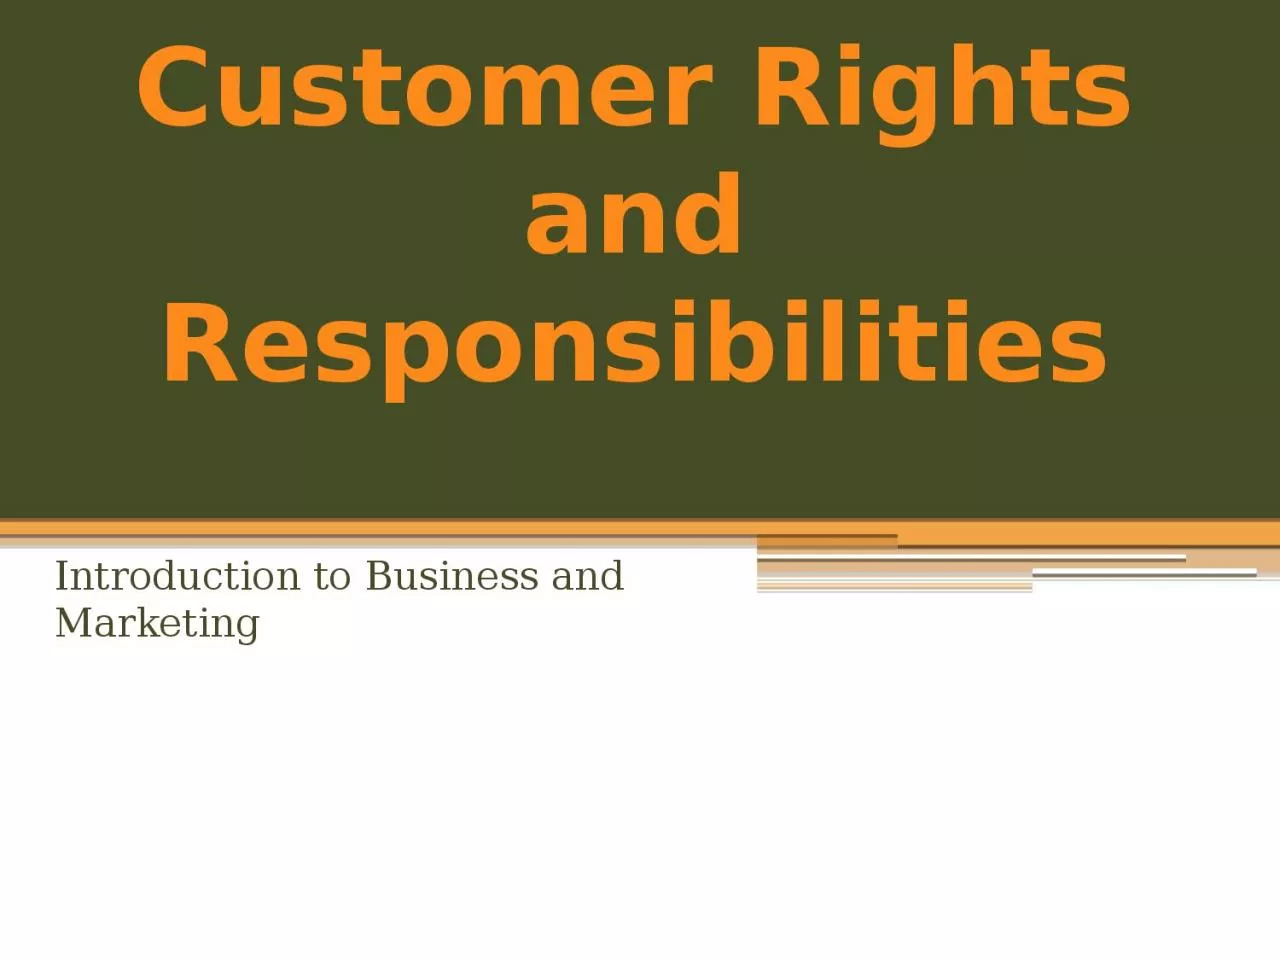 Customer Rights and Responsibilities